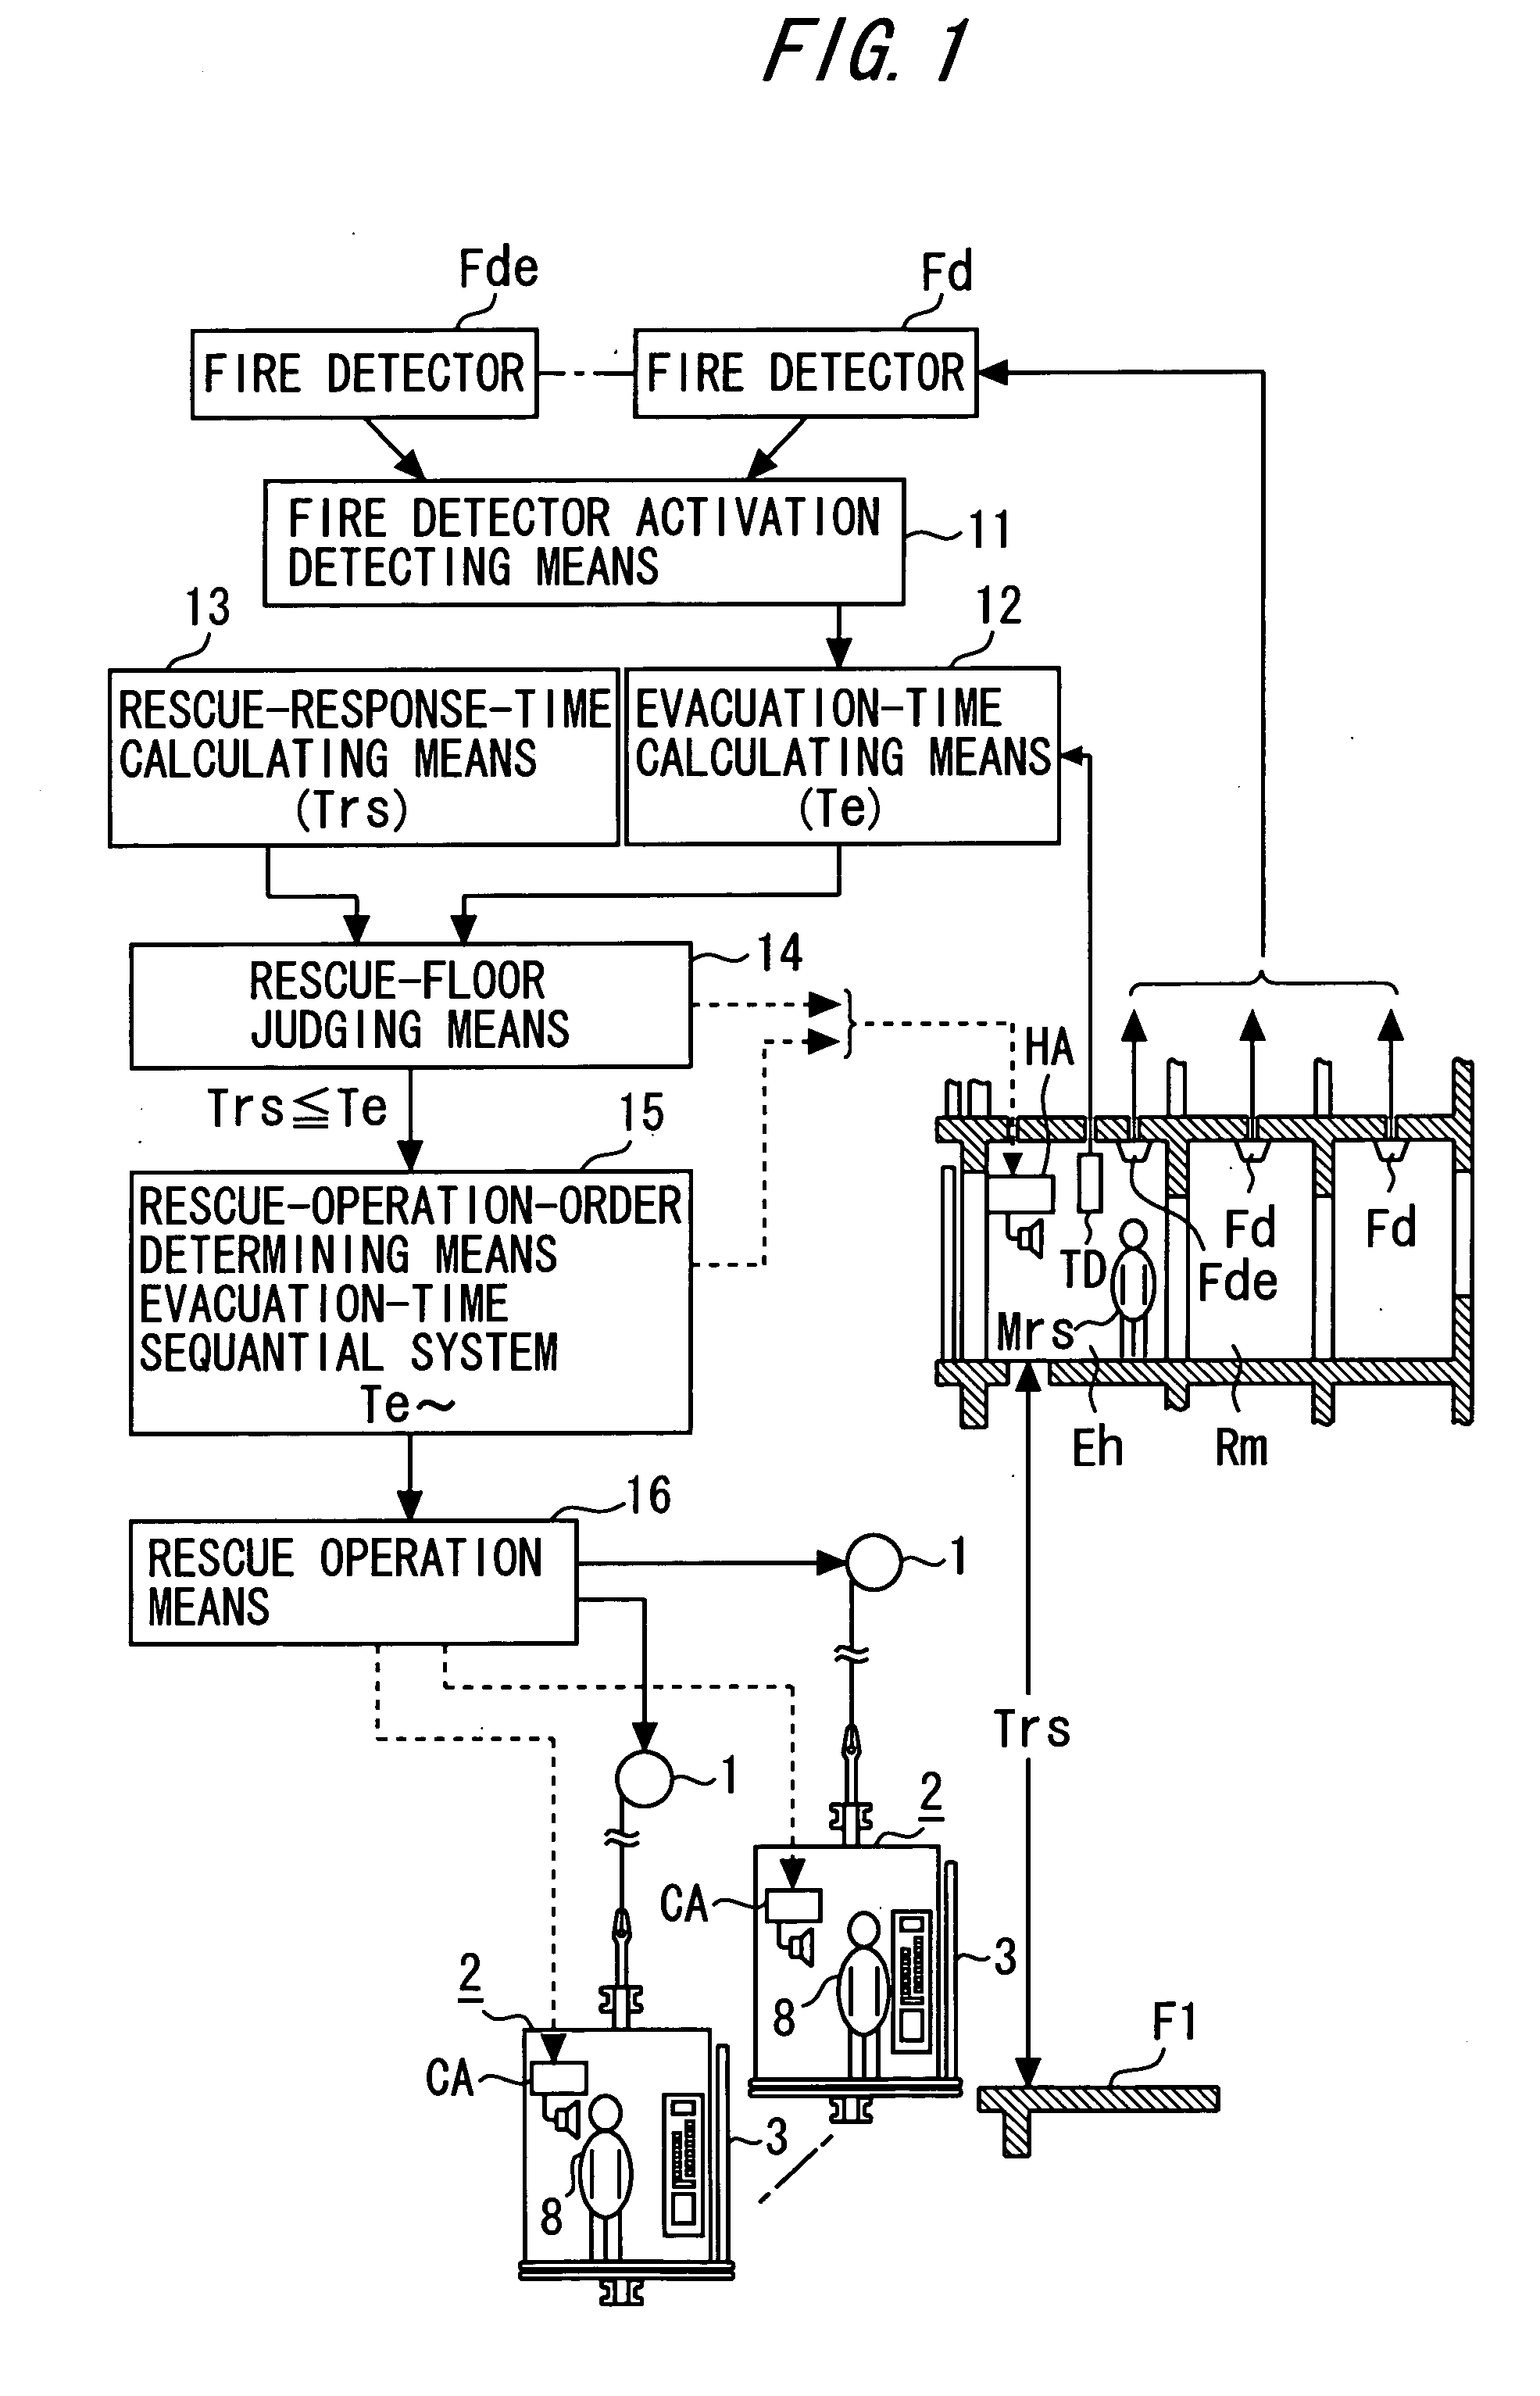 Fire control system for elevator